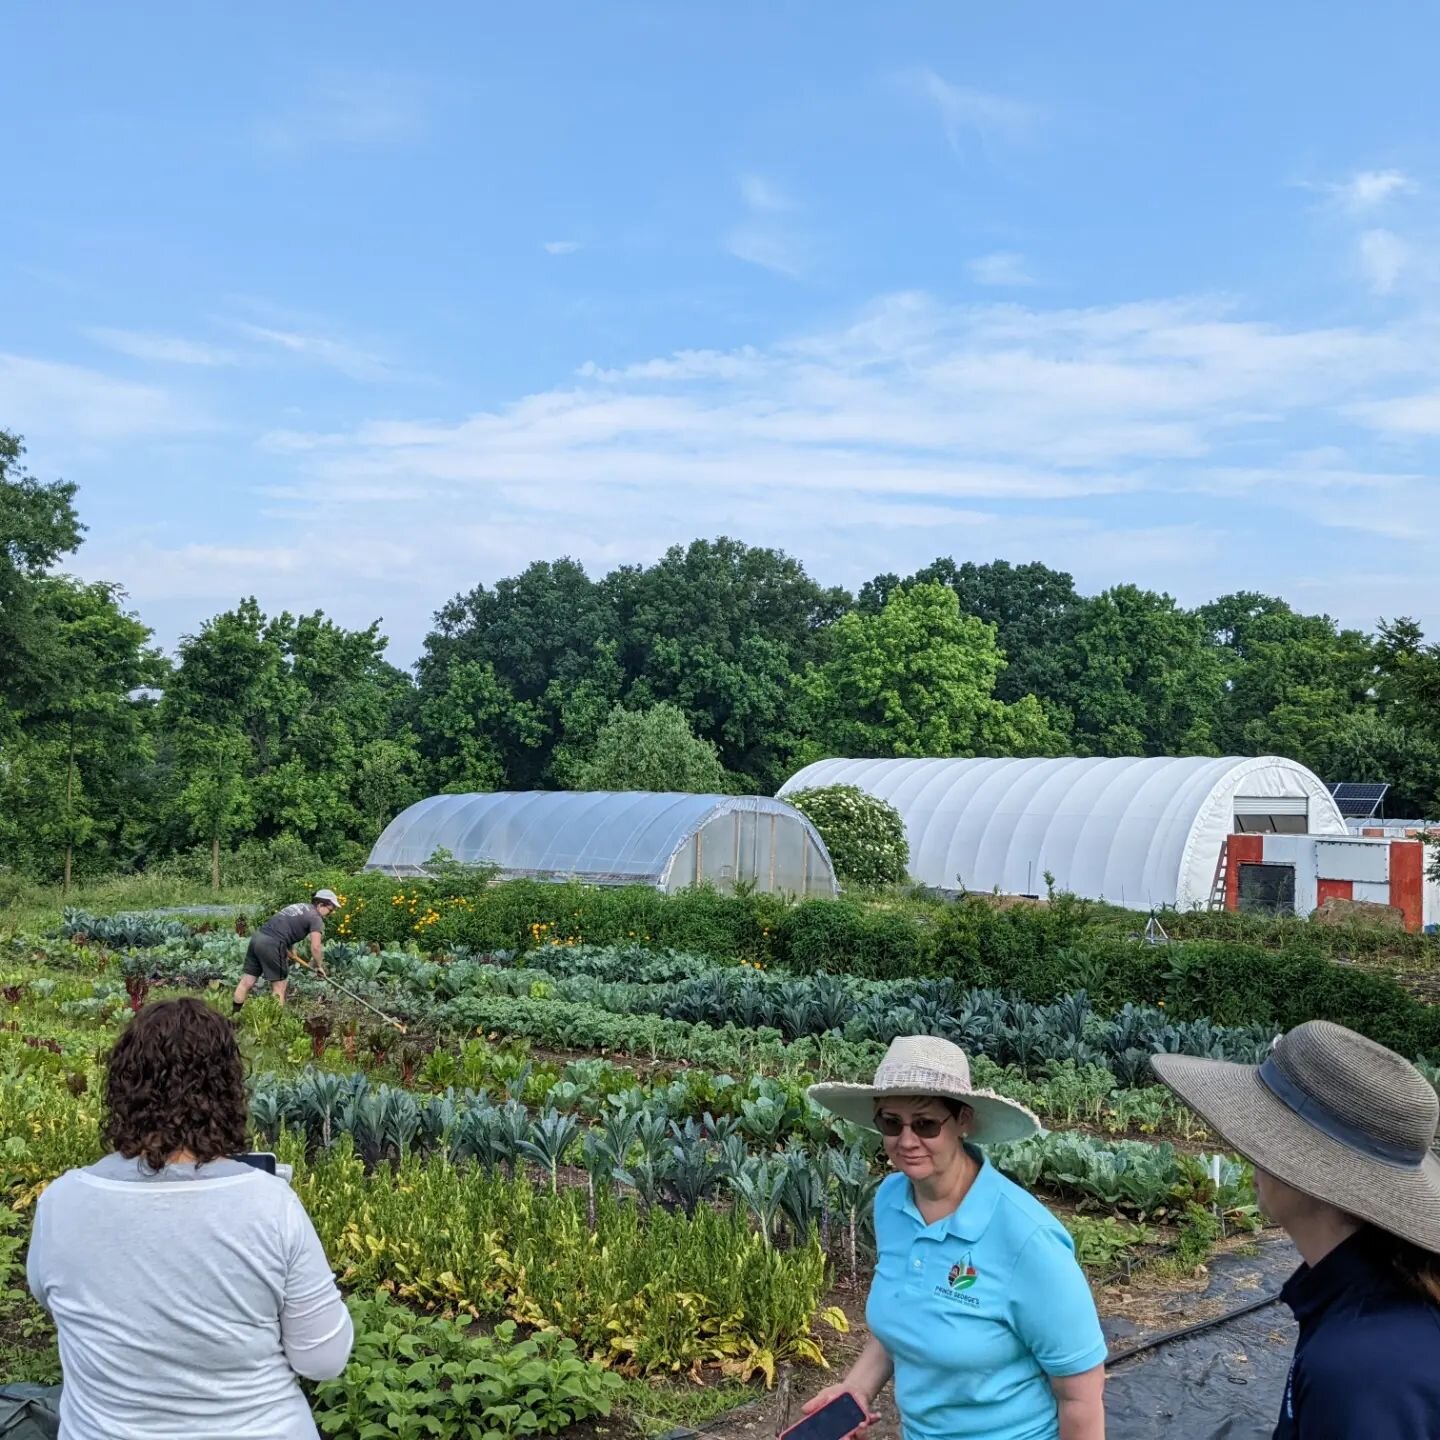 Thank you @ecocityfarms for taking the time to show us around your site and share your story this morning!